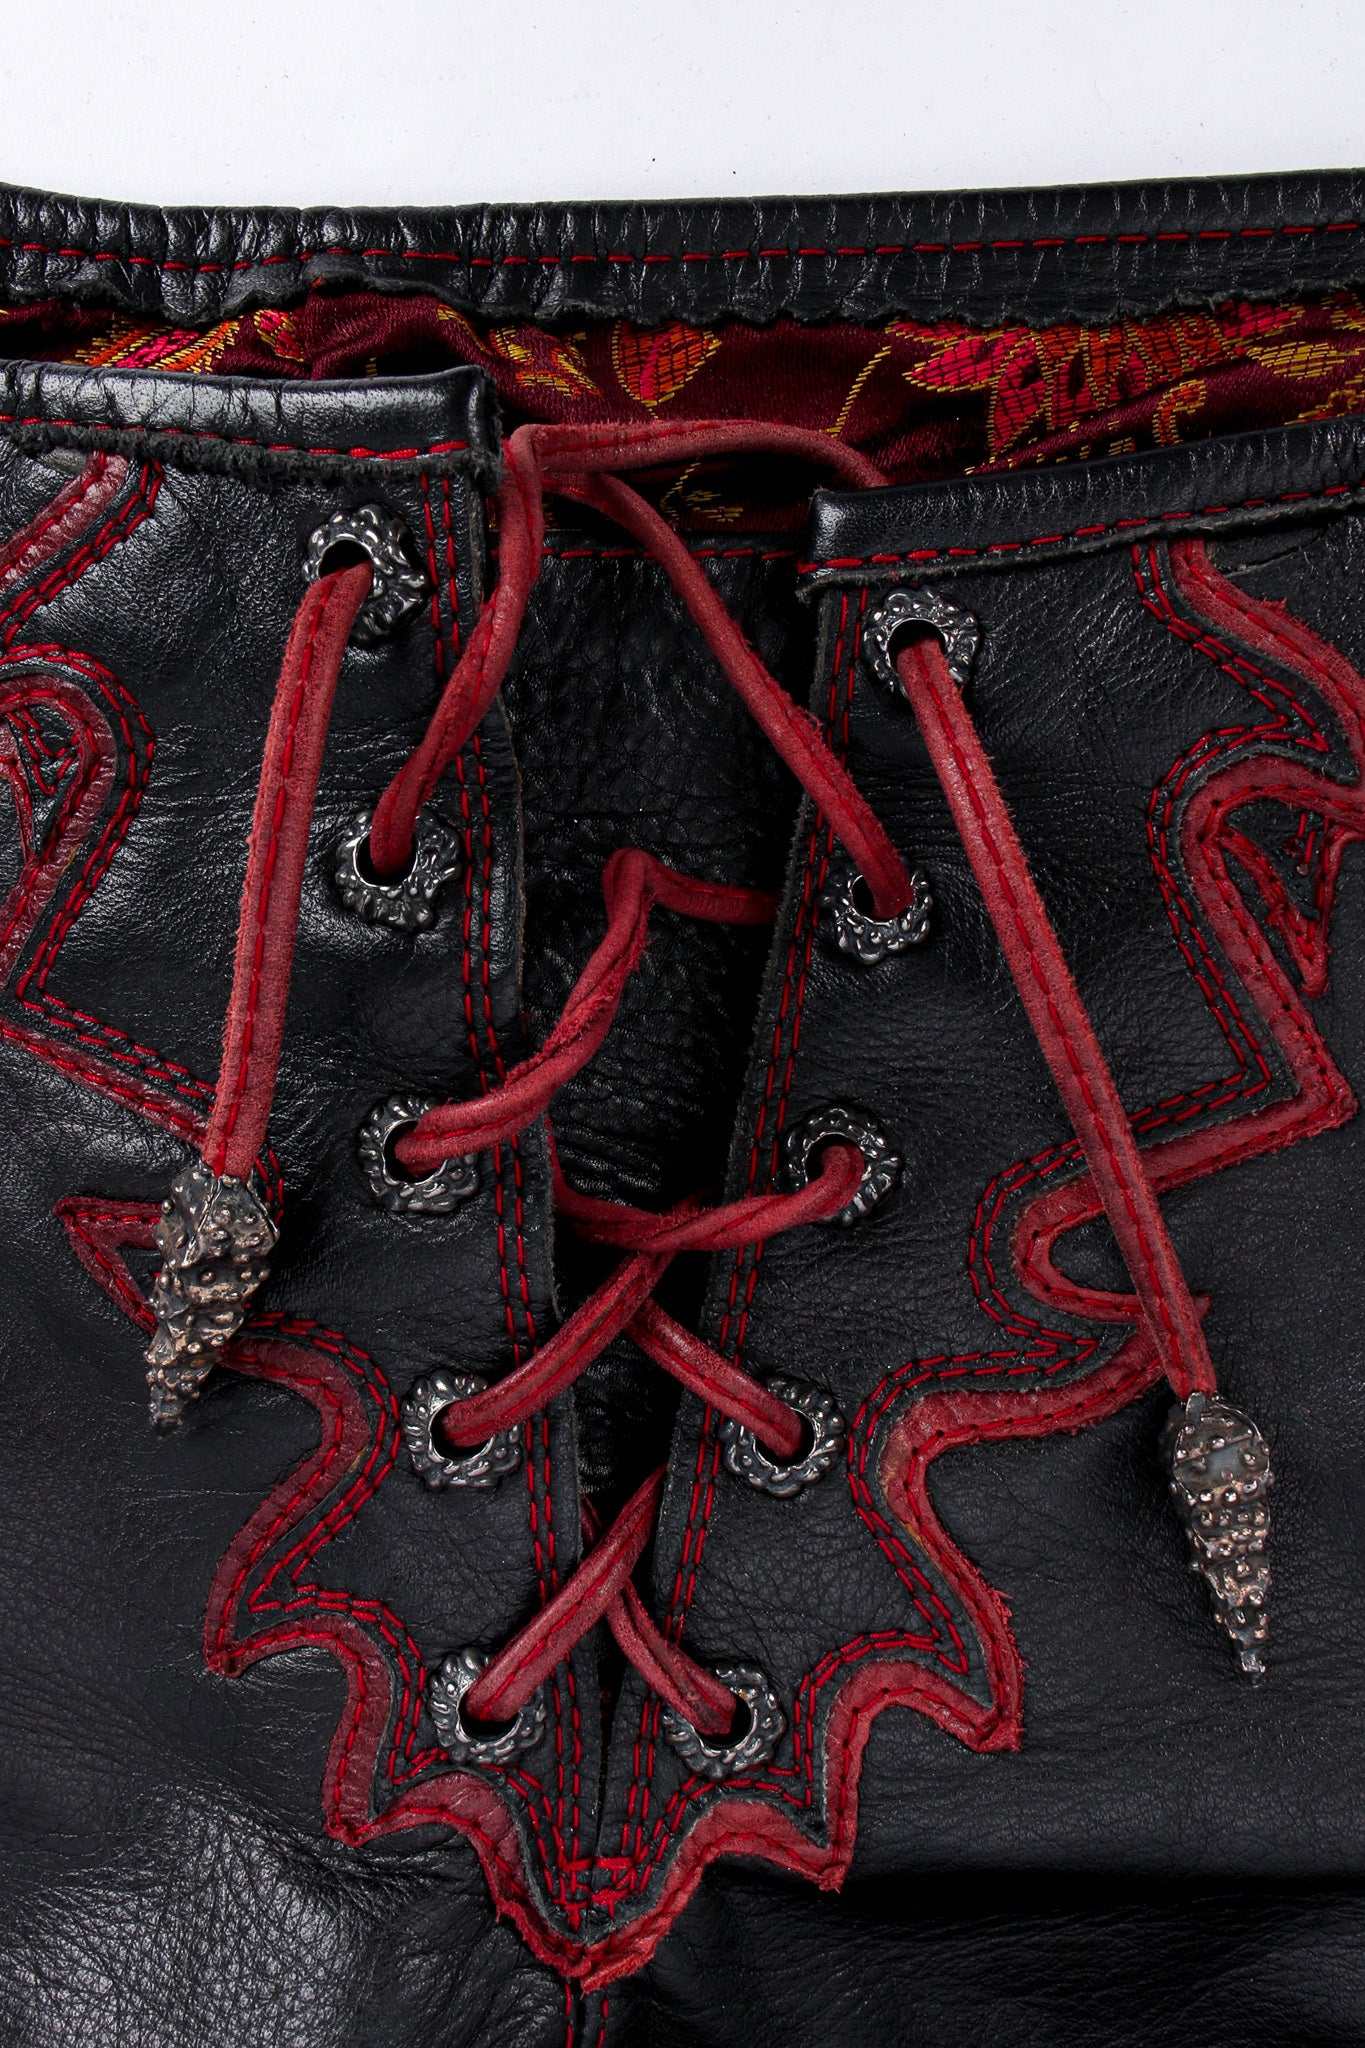 Artisanal Handmade Flame Lace Up Leather Pant lace/charm close up @ Recess LA